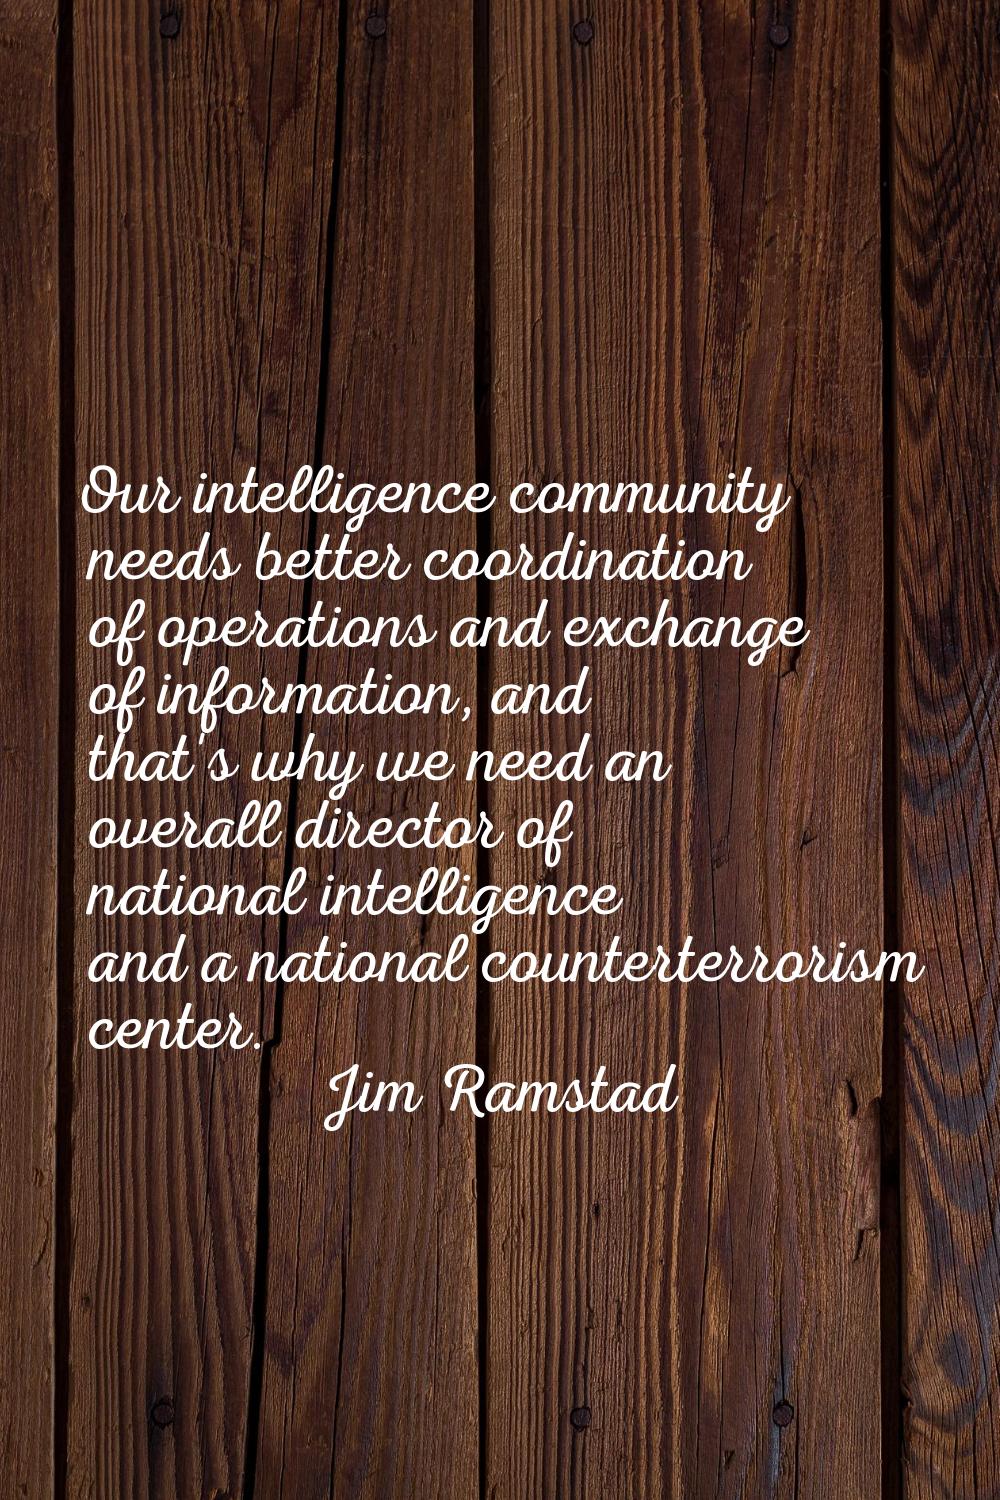 Our intelligence community needs better coordination of operations and exchange of information, and